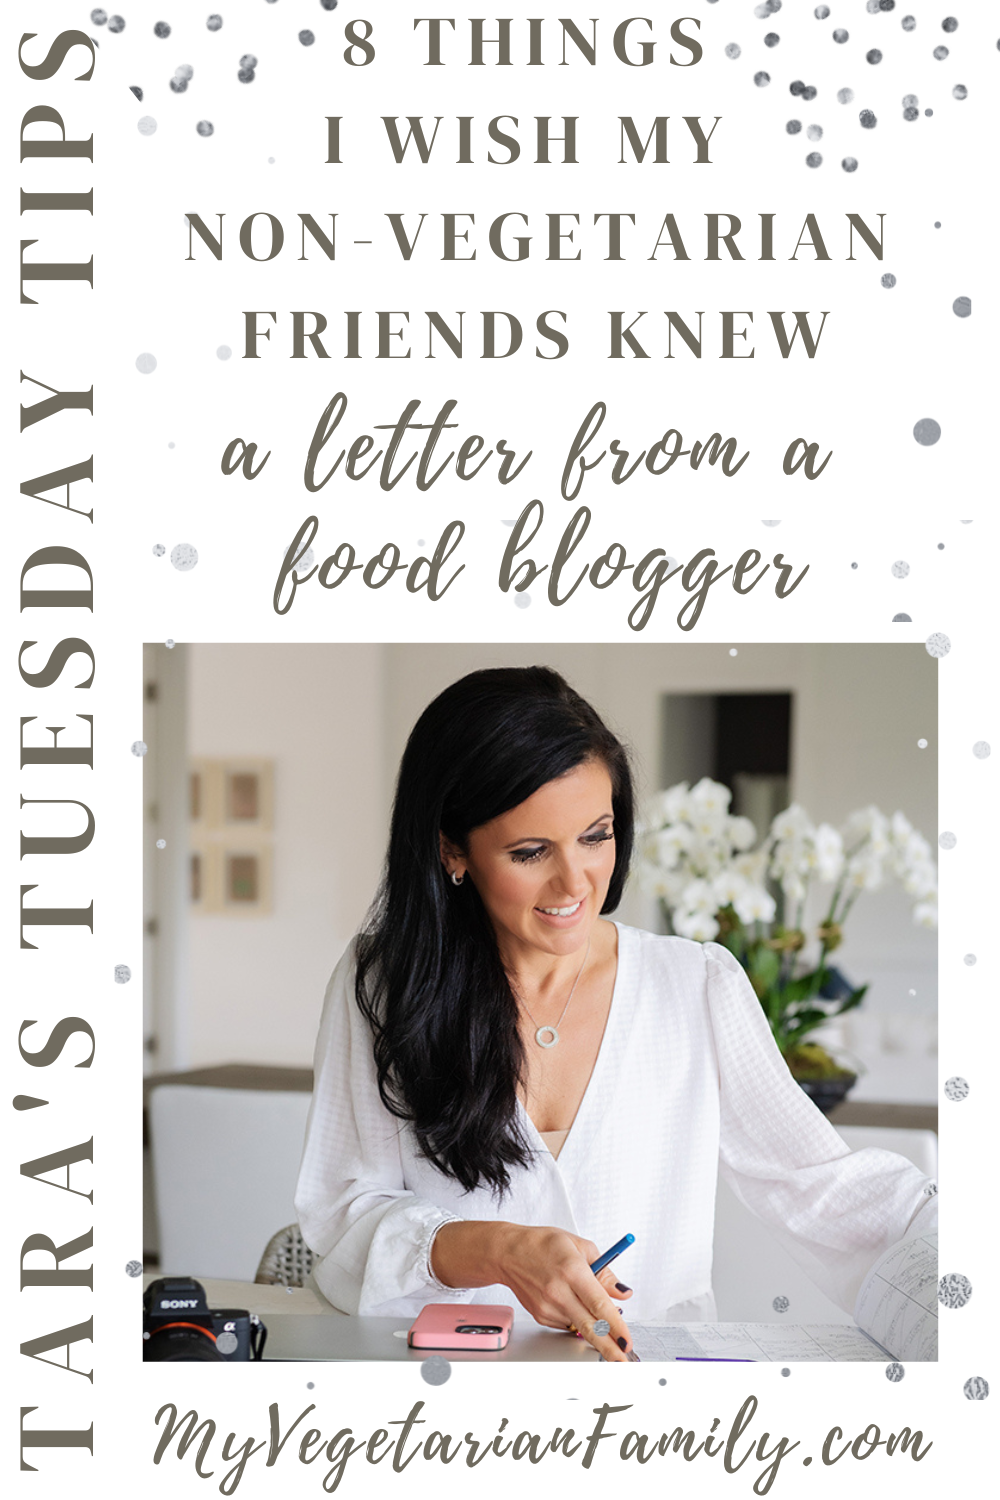 8 Things I Wish My Non-Vegetarian Friends Knew | Tara's Tuesday Tips | My Vegetarian Family #letterfromafoodblogger